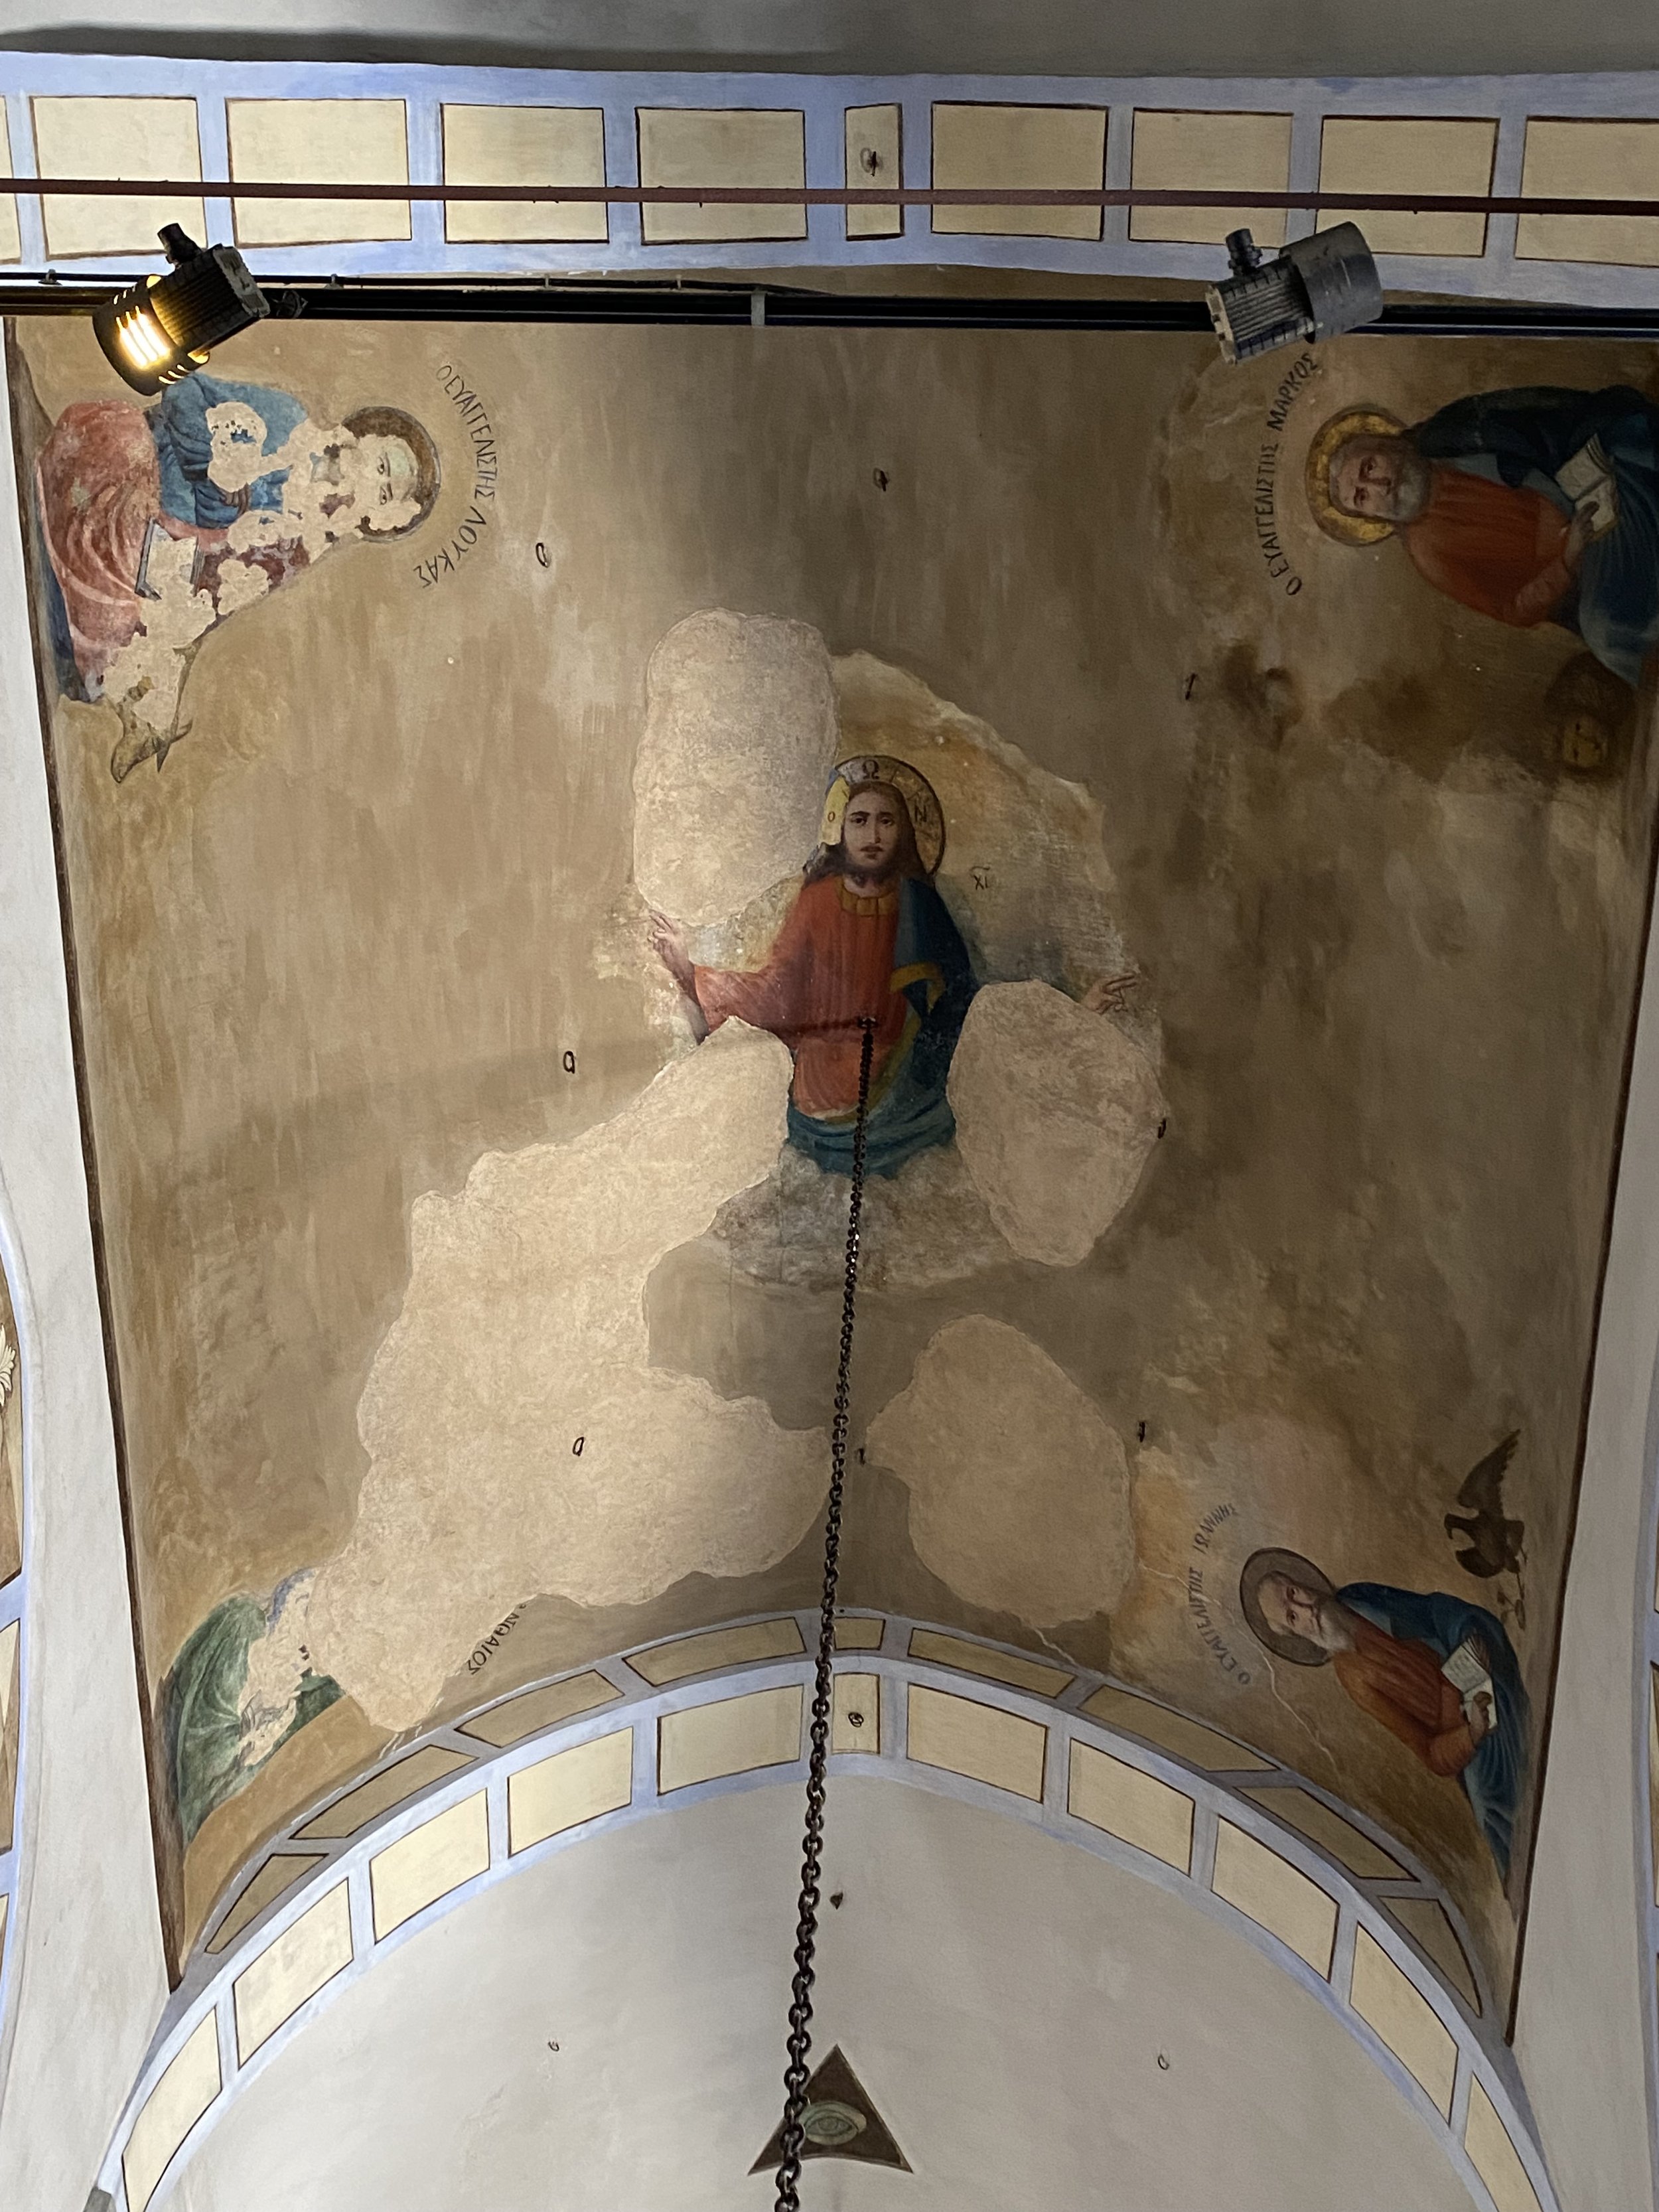 A close-up of frescoes on the ceiling of the St. Paul Memorial Museum in Tarsus.